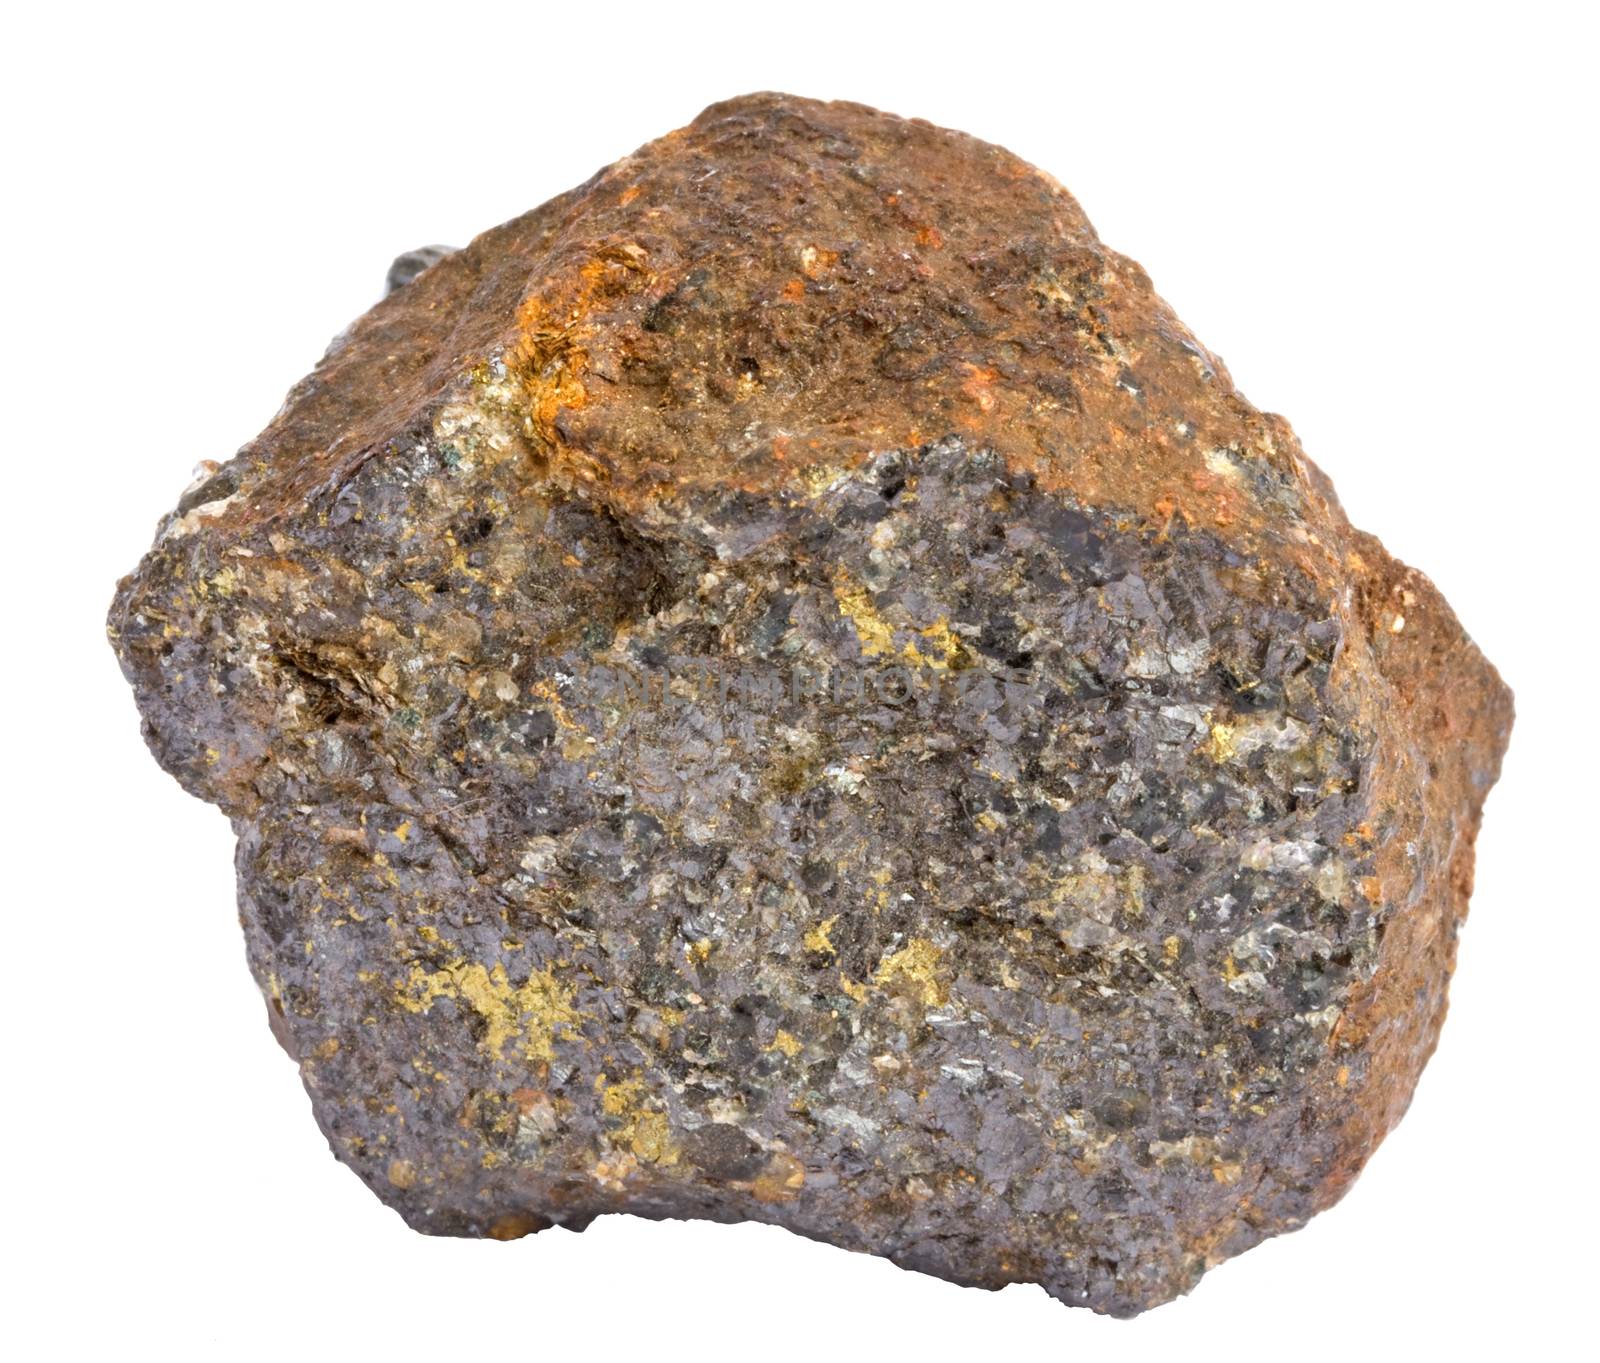 Sample of galena ore, also containing chalcopyrite and sphalerite